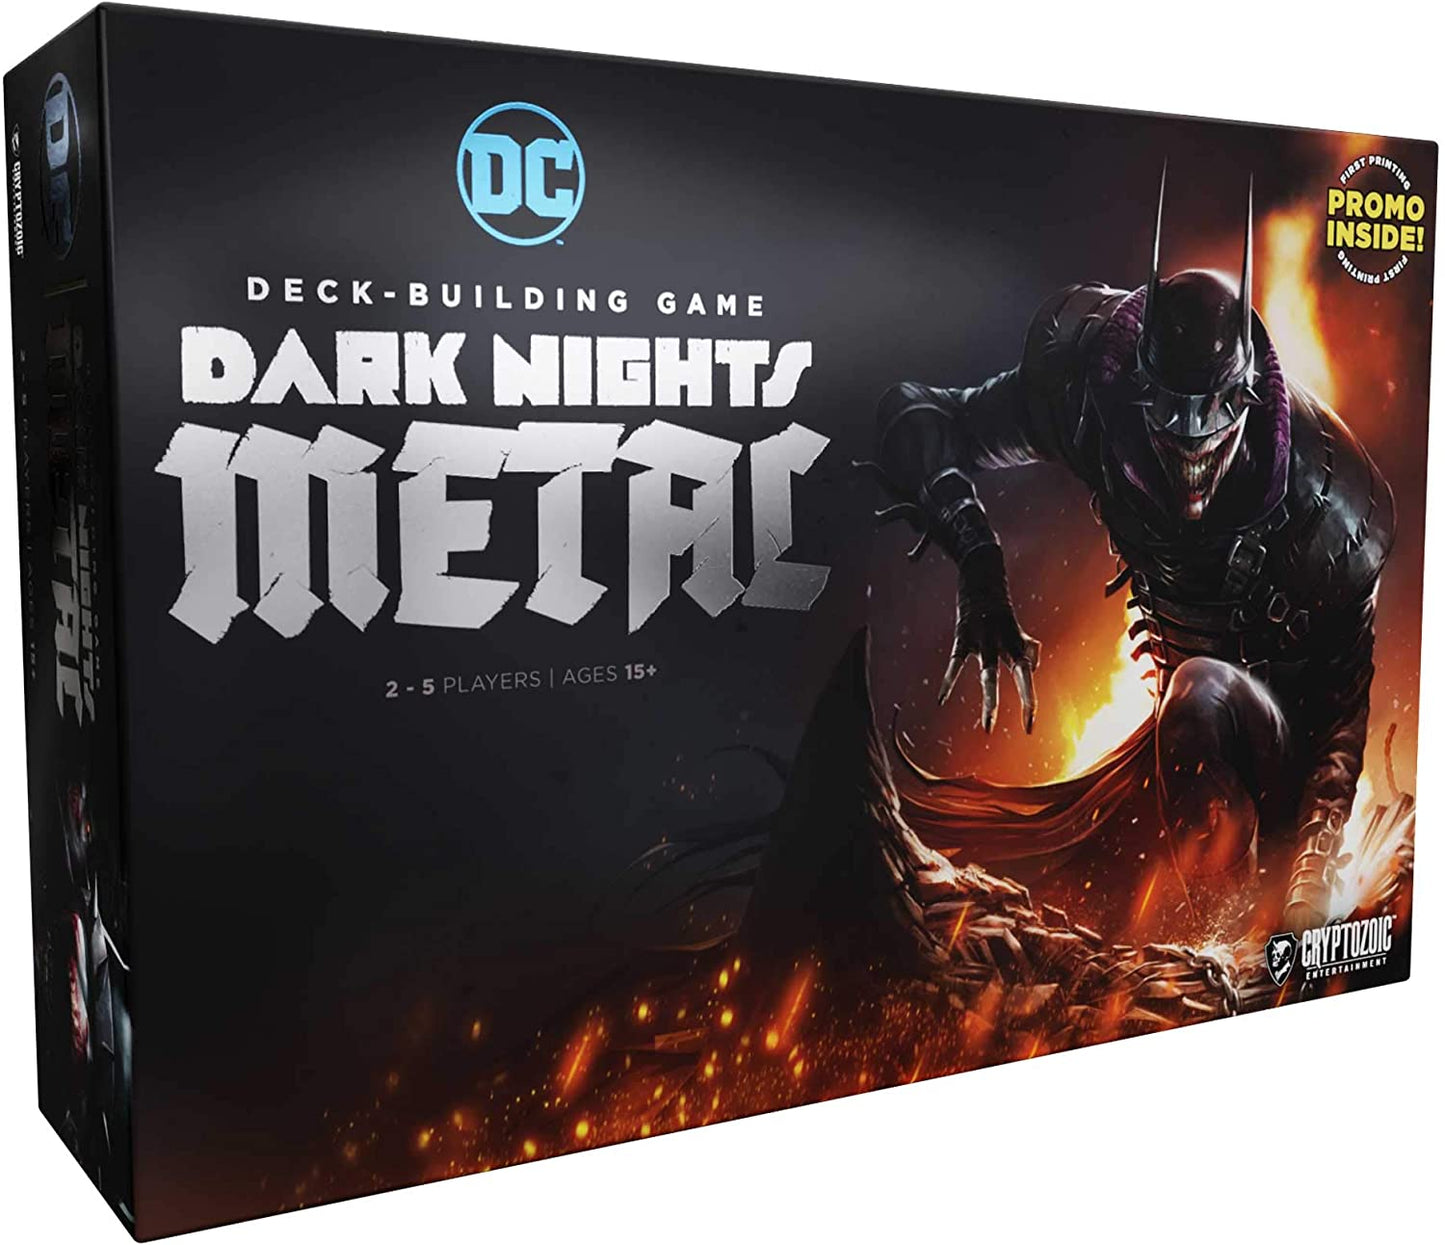 DC Comics: Deck-Building Game: #5 Dark Nights Metal (stand alone or expansion)